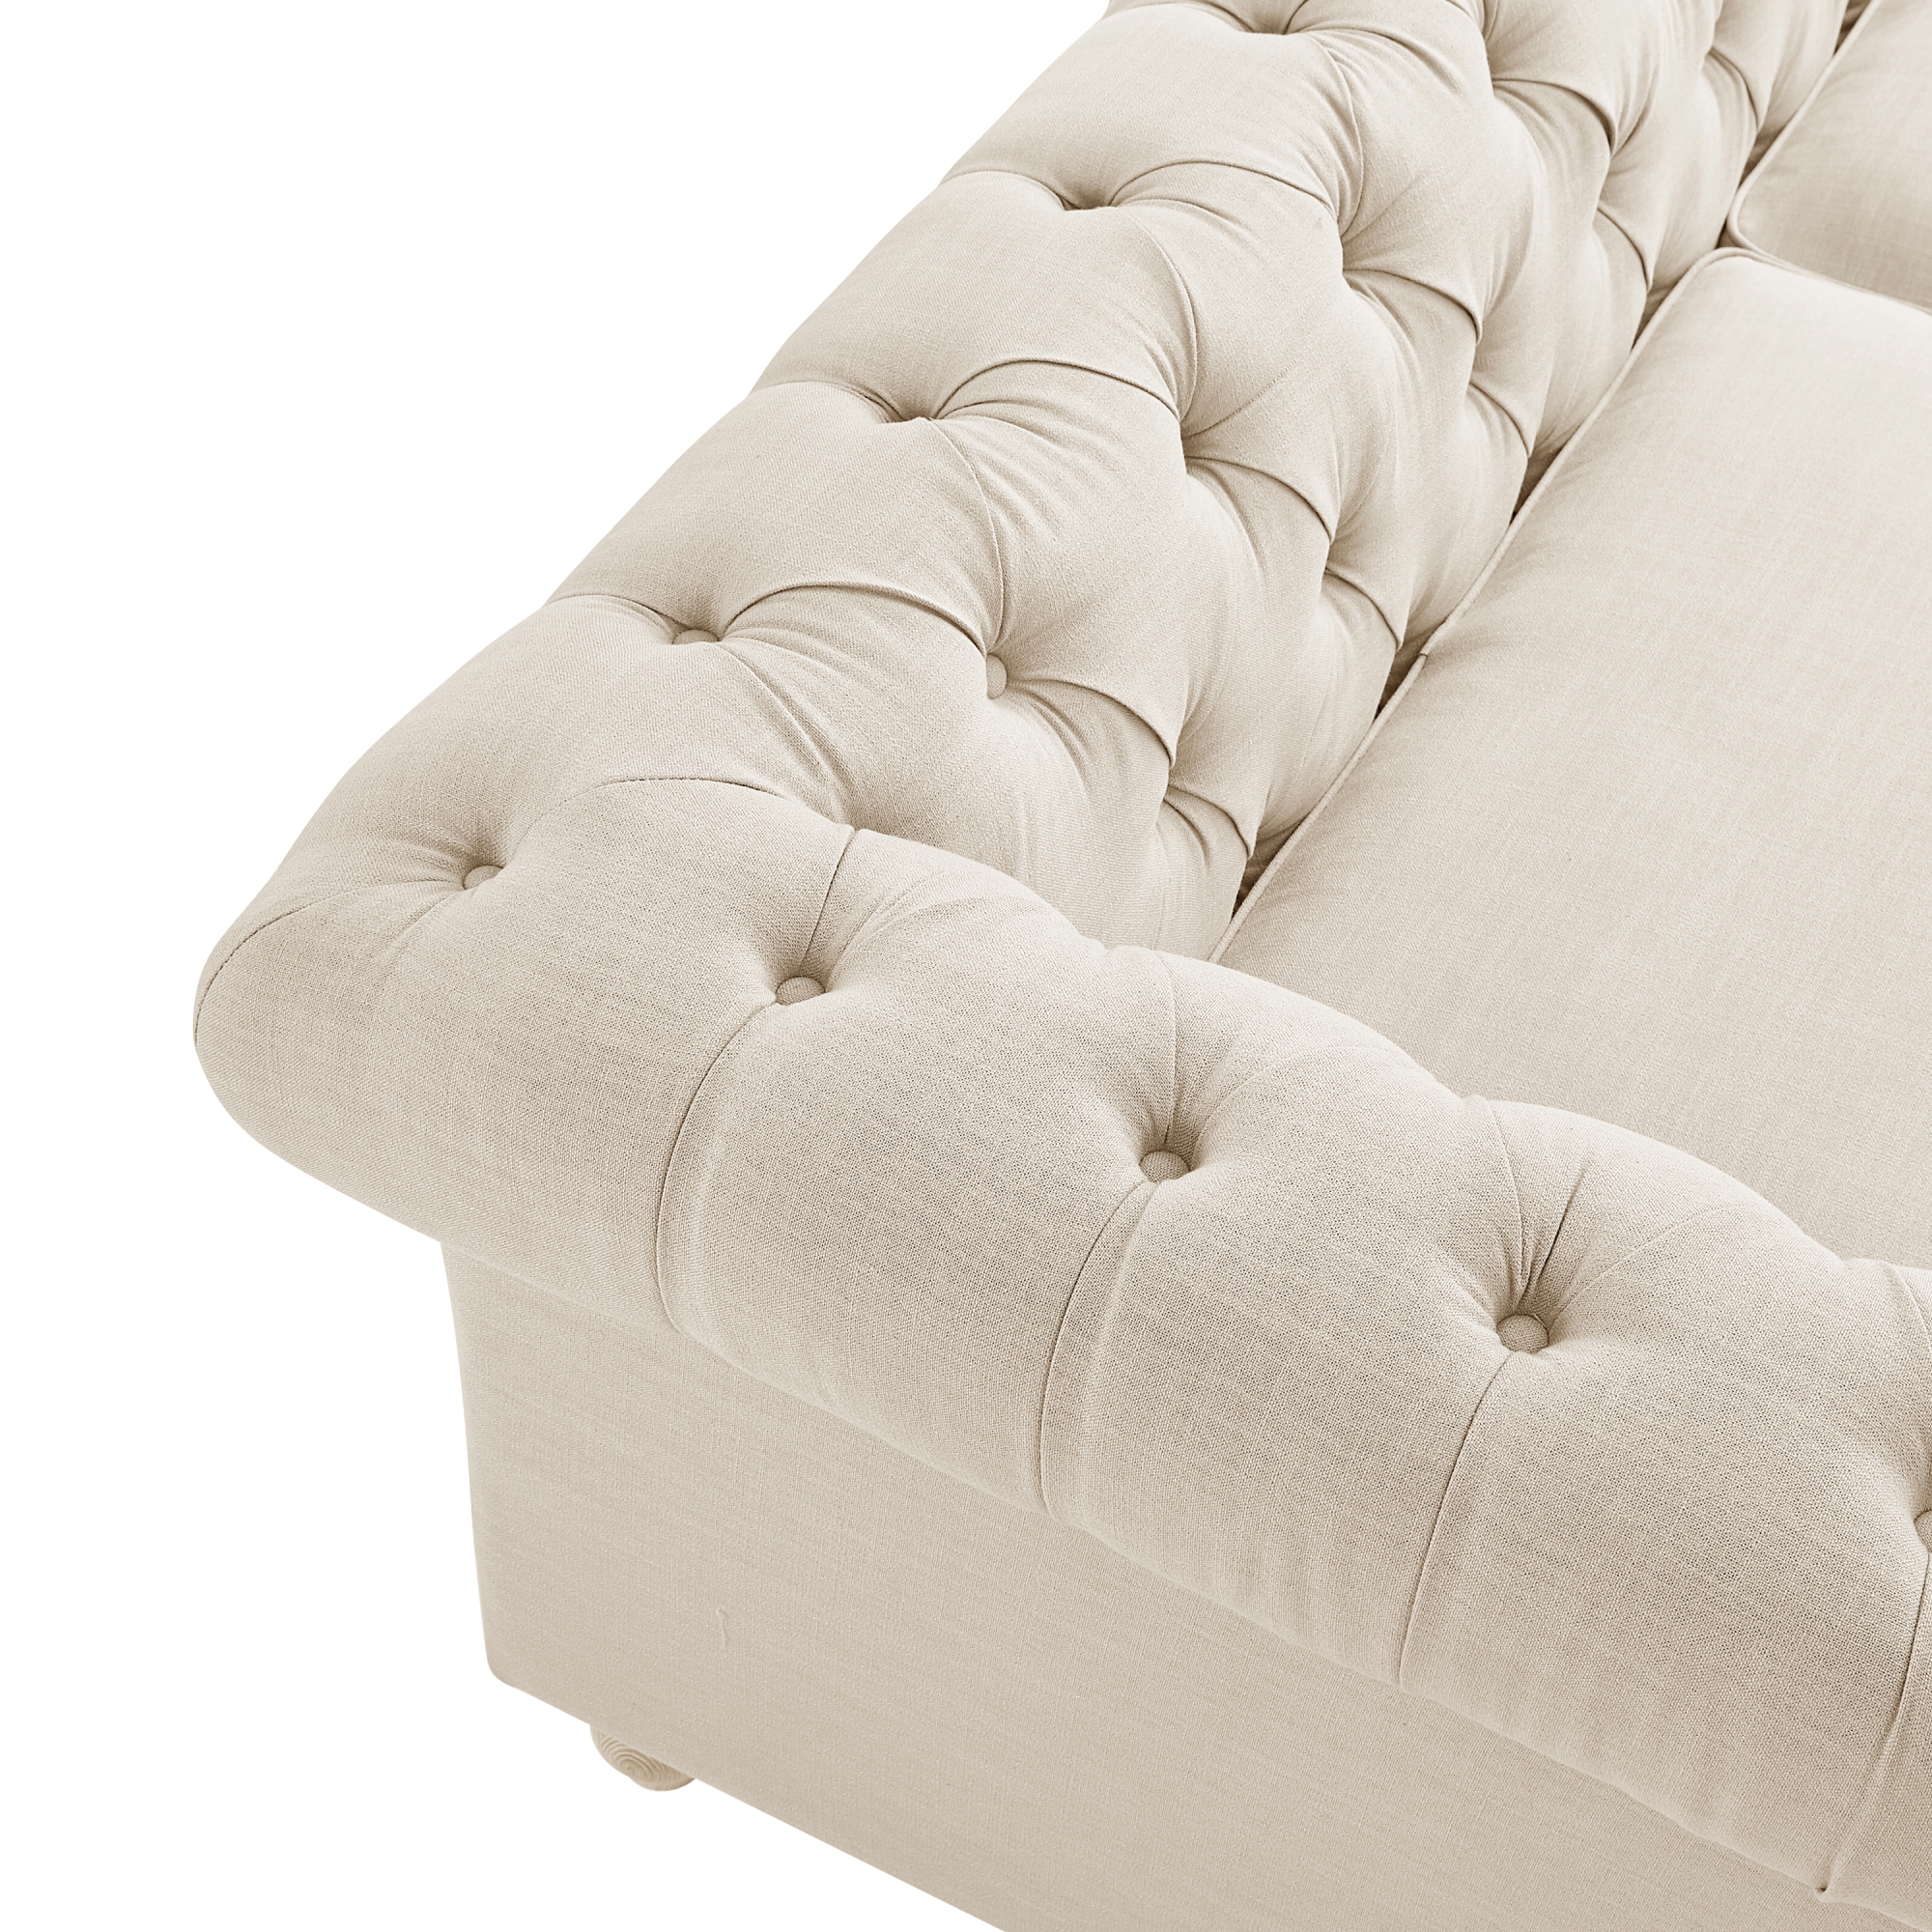 Rustic Manor Macey Chesterfield Sofa Button Tufted Rolled Arm, Sinuous Springs Round Bun Leg with Caster, Removable Seat Cushion